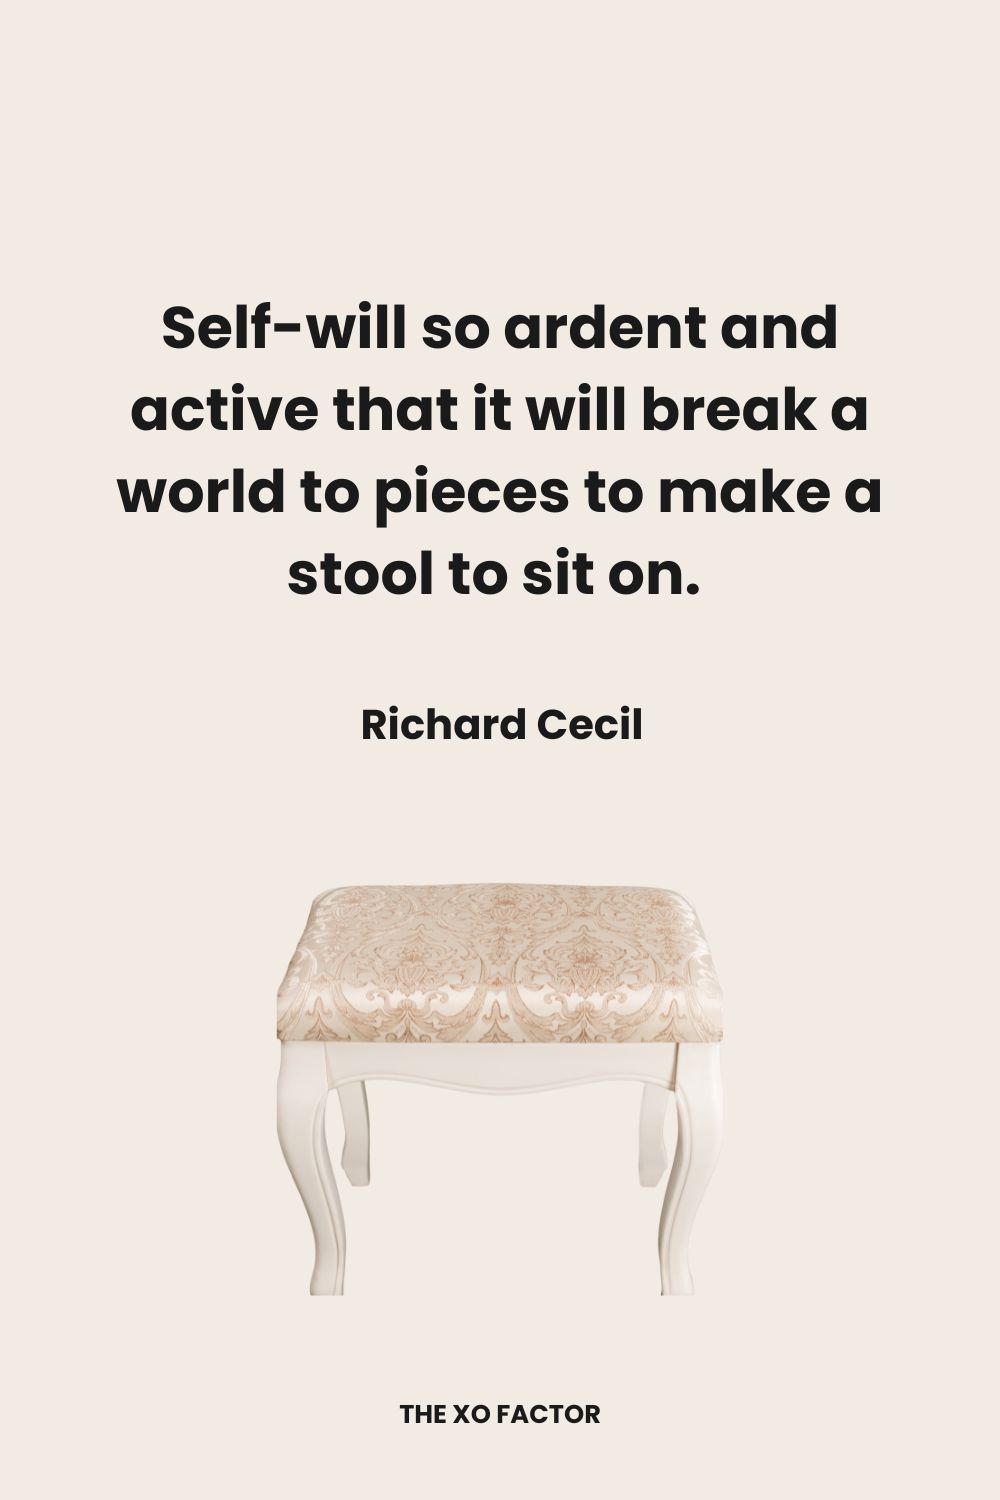 Self-will so ardent and active that it will break a world to pieces to make a stool to sit on.  Richard Cecil